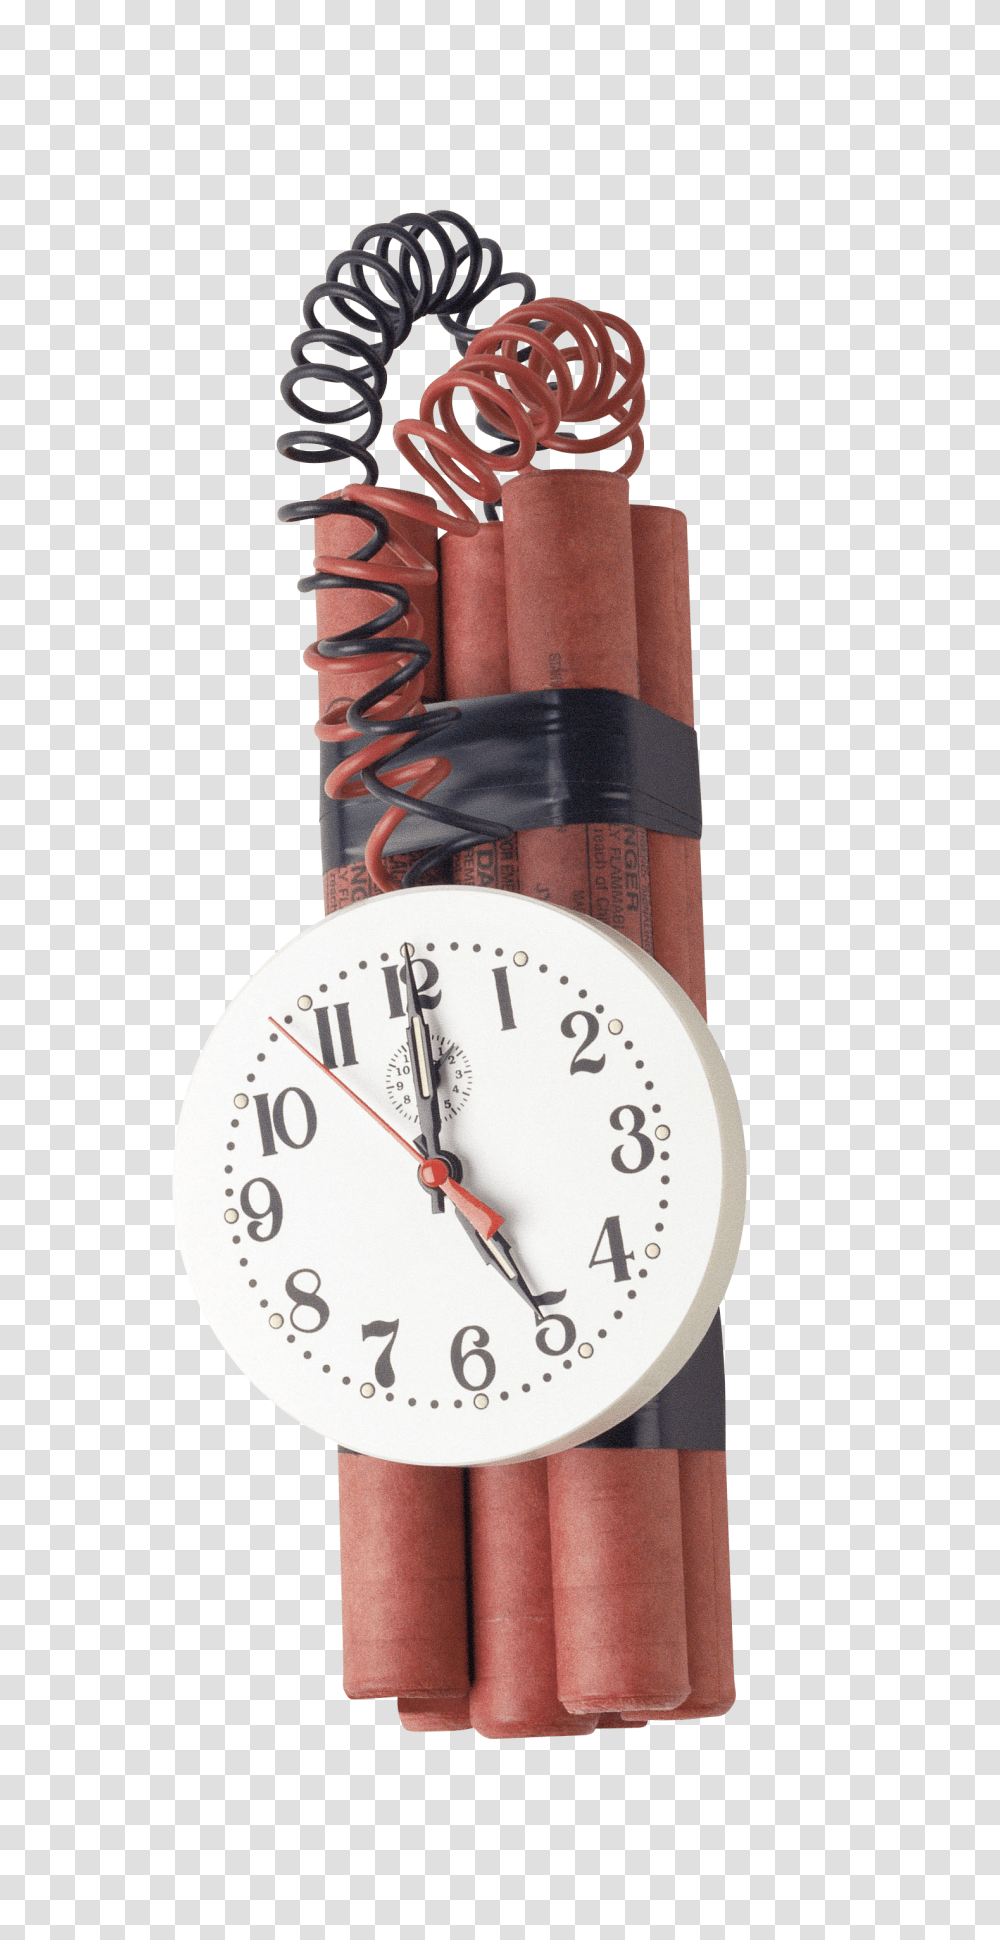 Time Bomb, Weapon, Weaponry, Clock Tower, Architecture Transparent Png